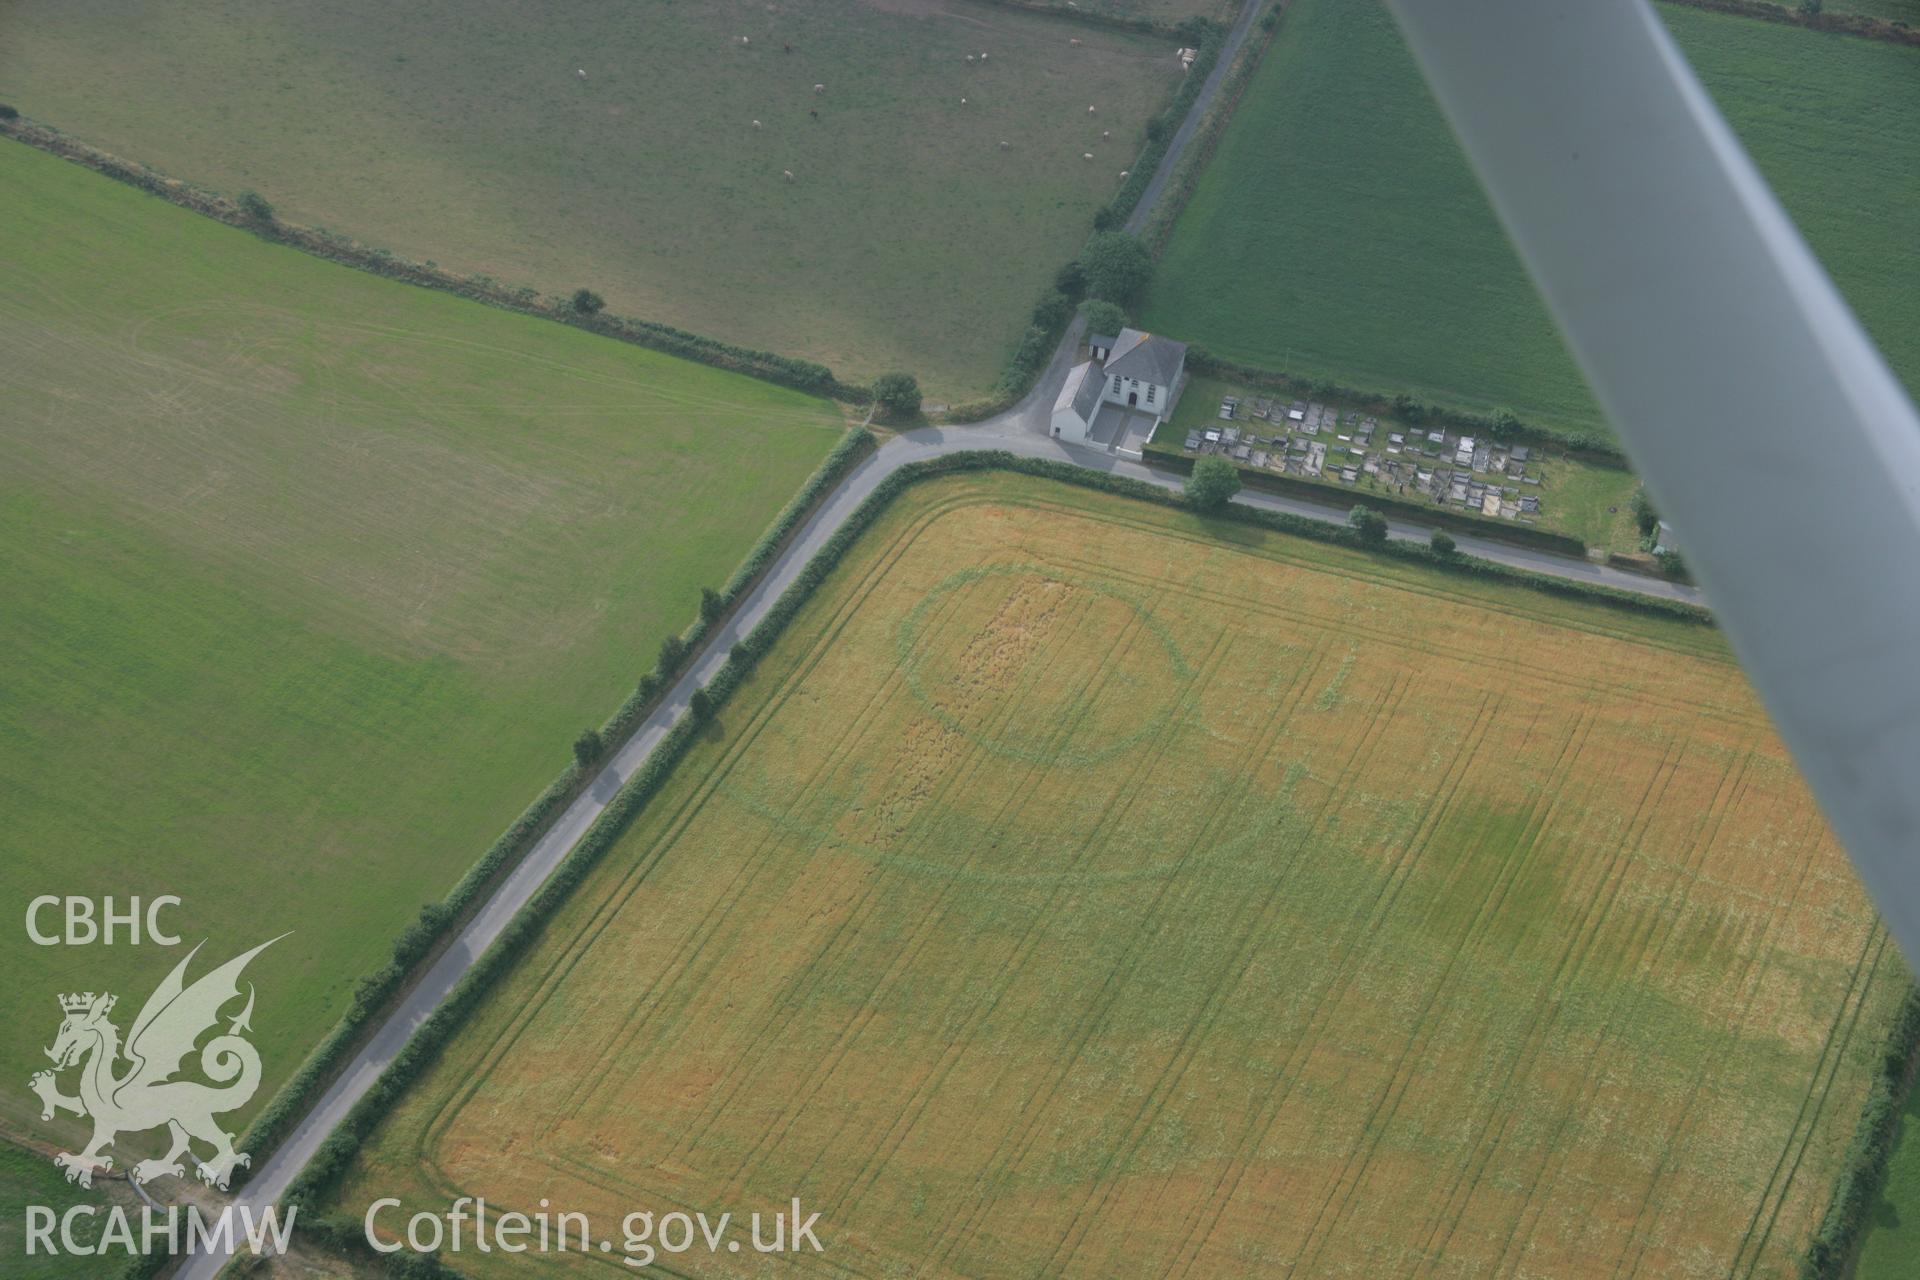 RCAHMW colour oblique aerial photograph of a cropmark enclosure east of Treferedd Uchaf. Taken on 21 July 2006 by Toby Driver.